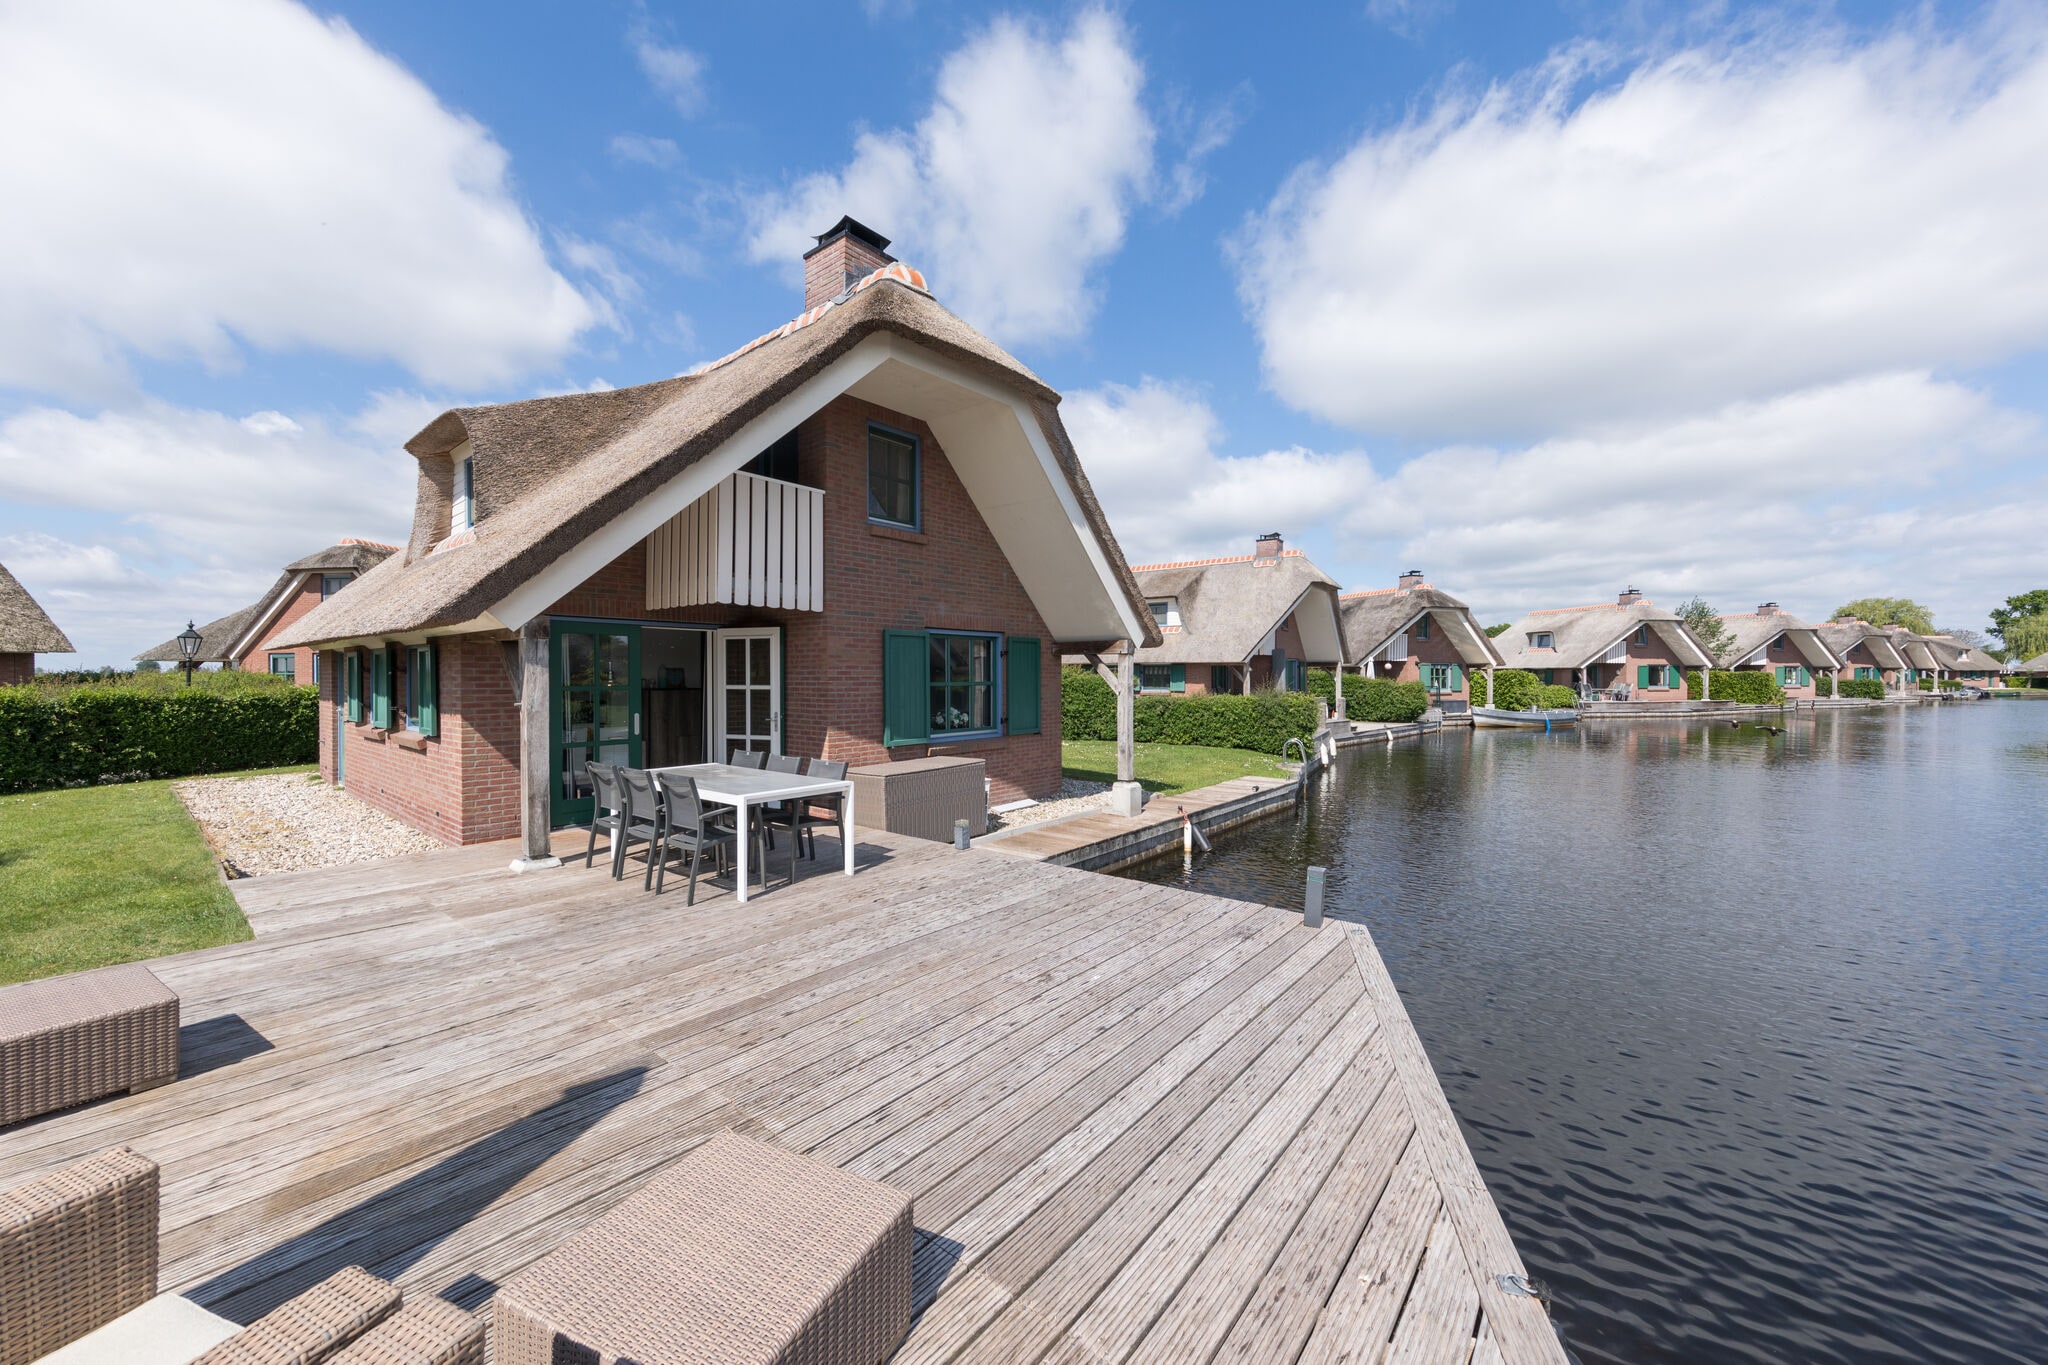 Thatched villa with a dishwasher at Giethoorn